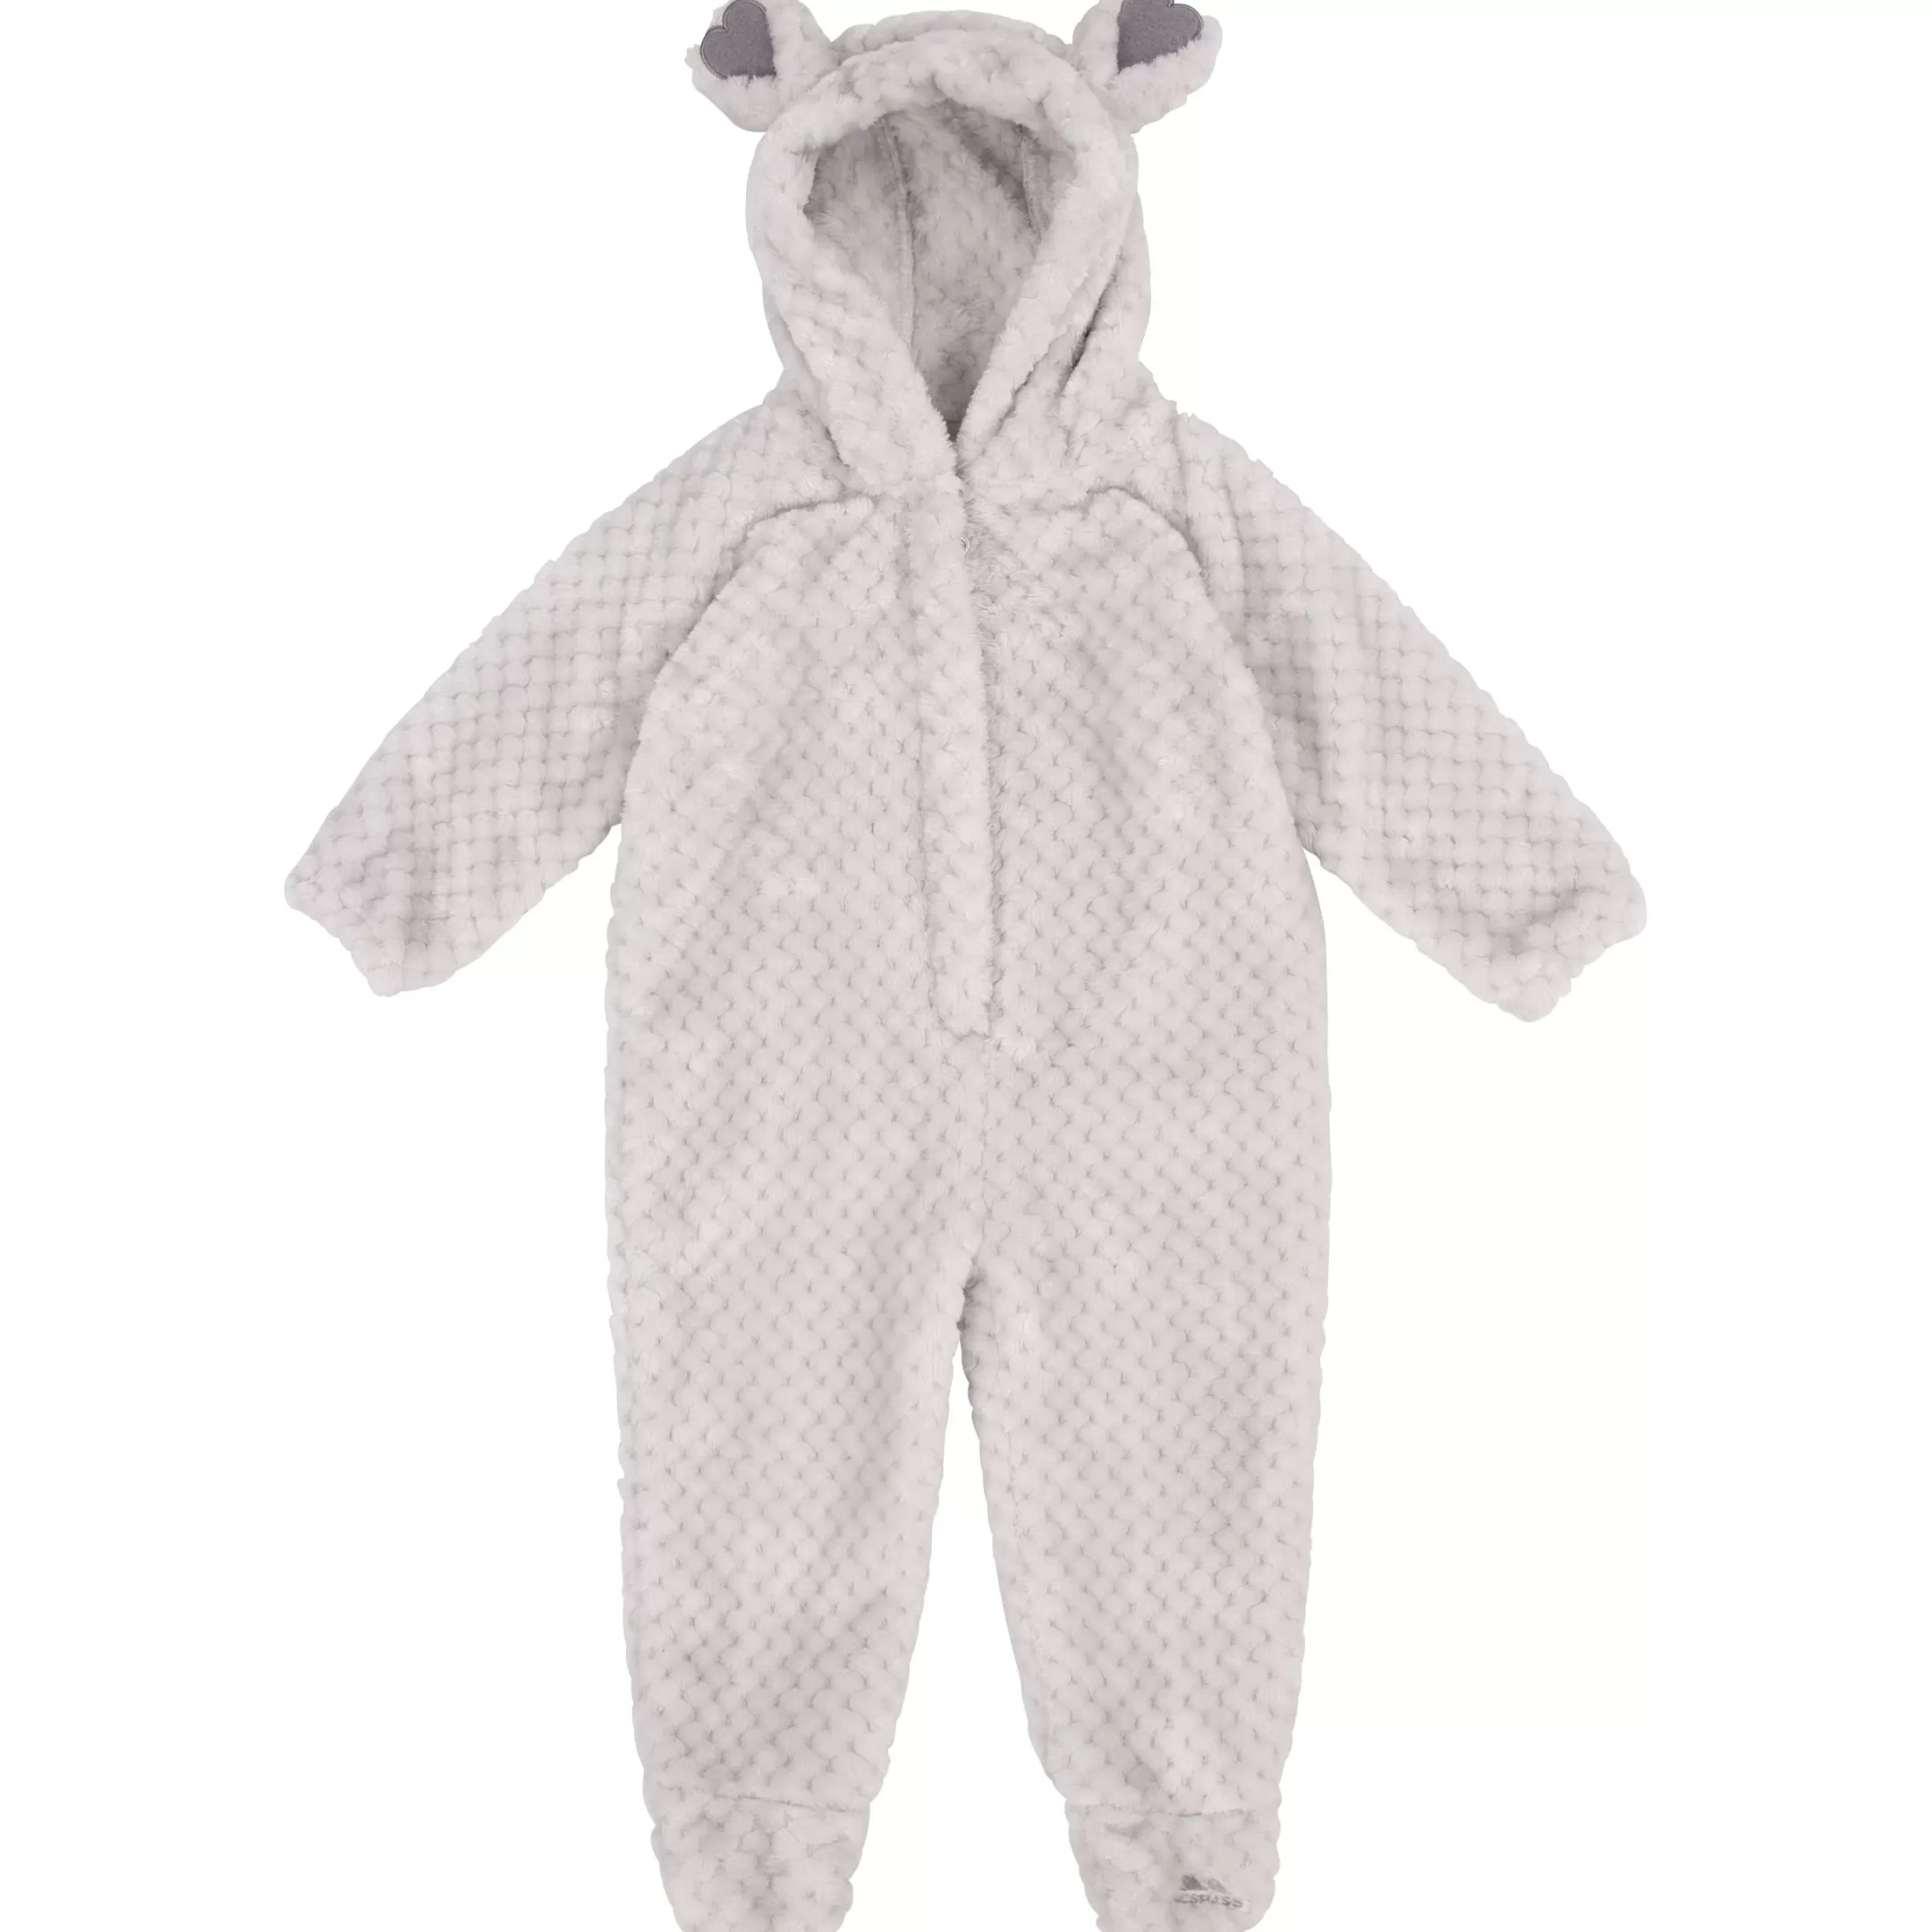 Baby Suit Loveable | Trespass Store